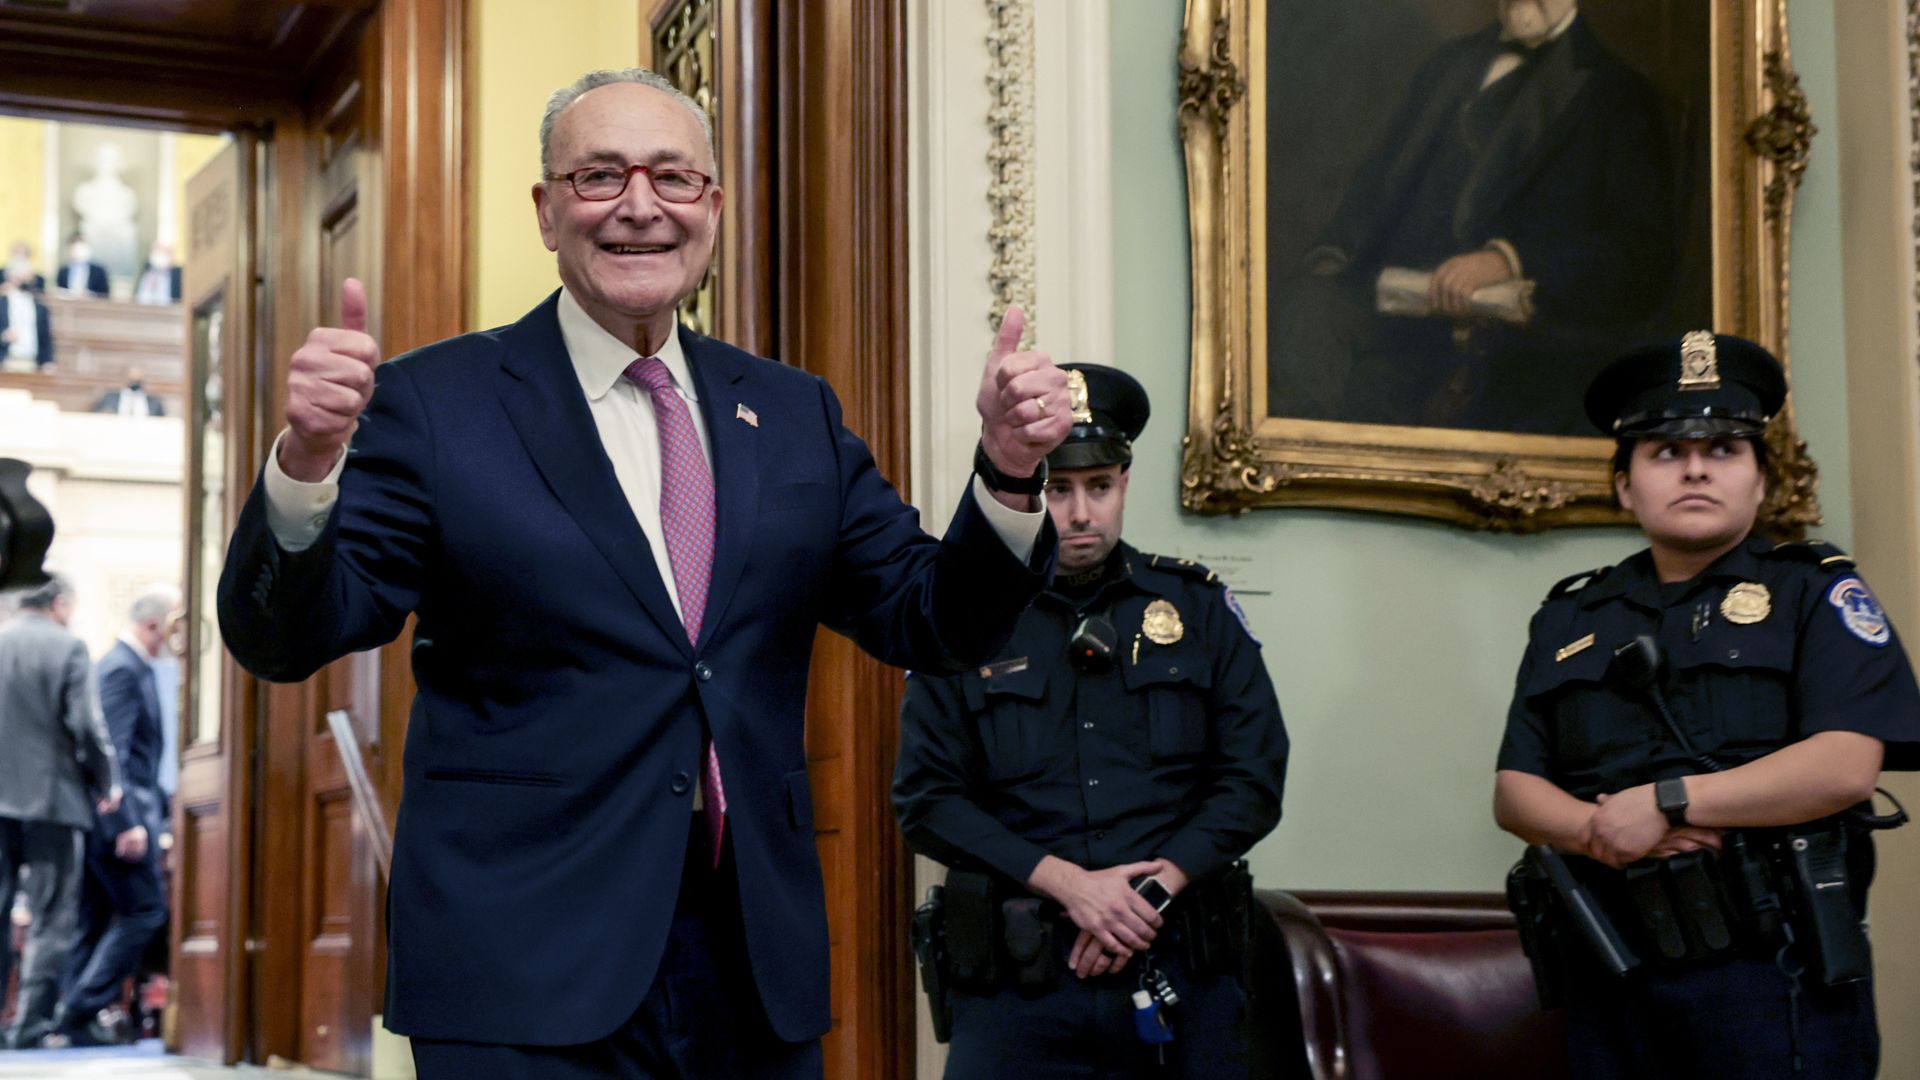 Senate Majority Leader Mitch McConnell is seen signaling "success" after Ketanji Brown Jackson was confirmed to the Supreme Court.